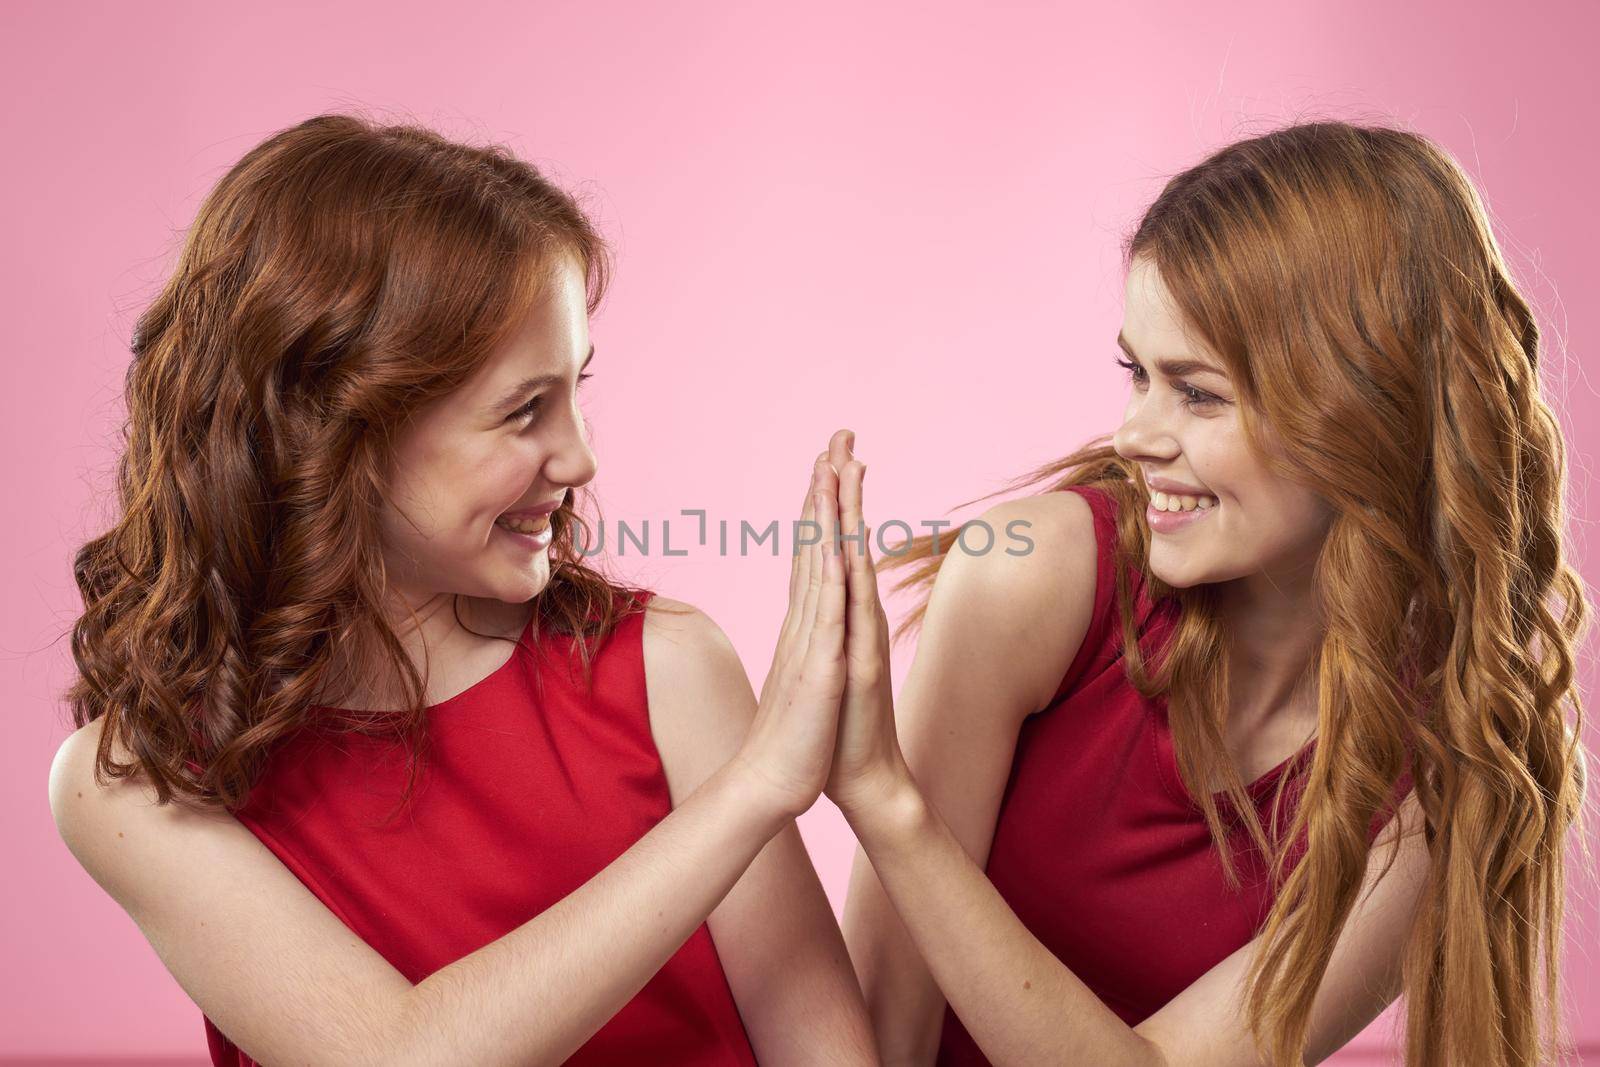 Mom and daughter fun communication family joy pink background cropped view. High quality photo